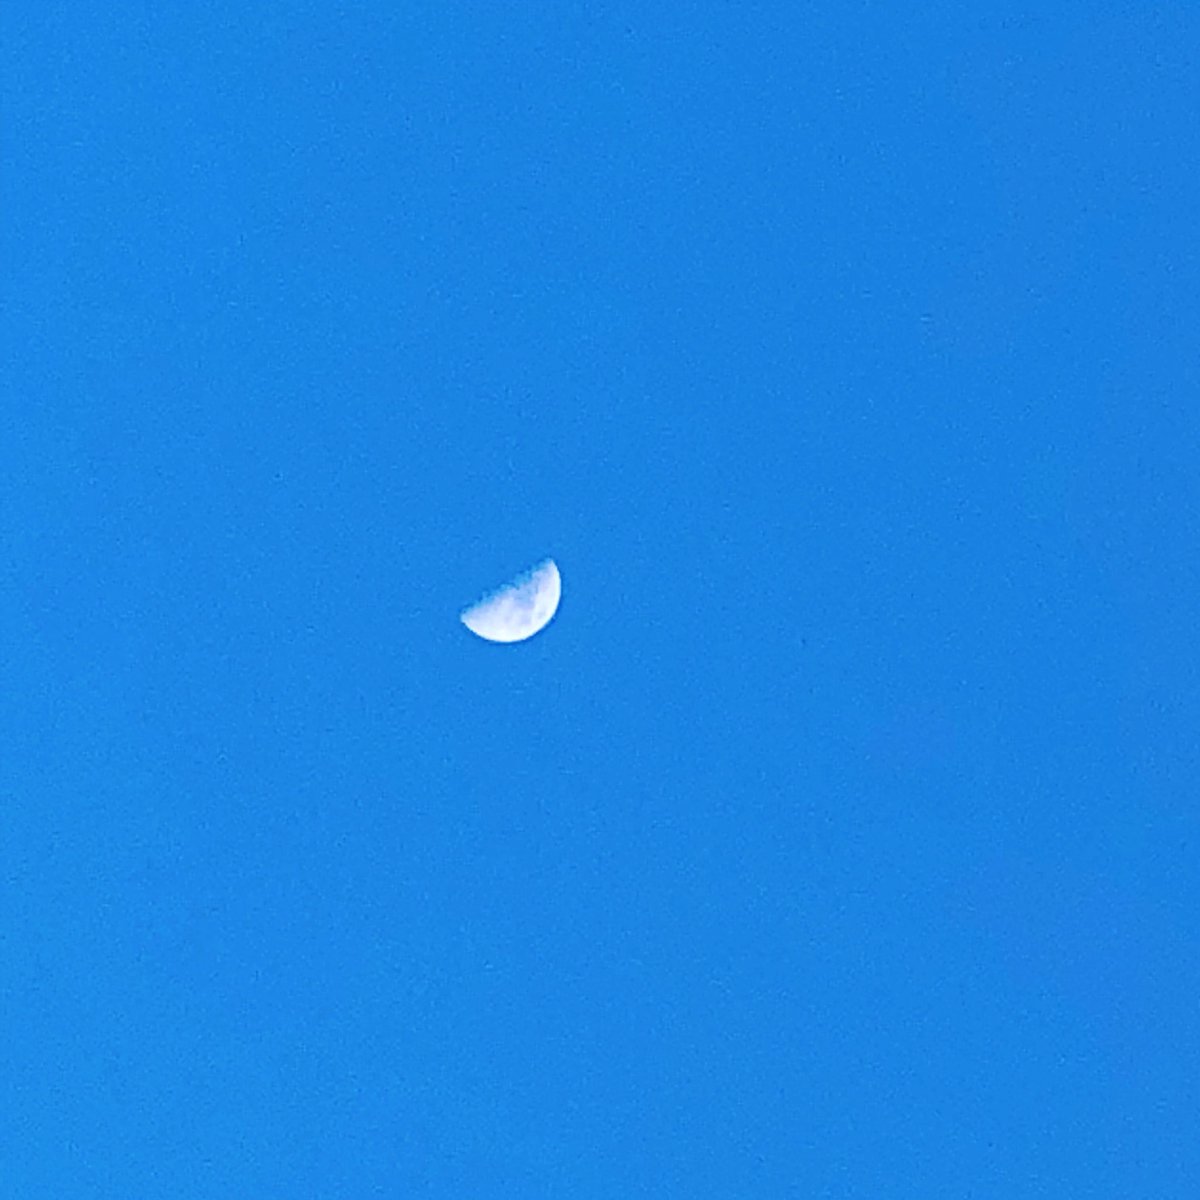 Saw the moon out the other day - guess the sun has a little competition 😜
#moonduringtheday #outdoorsismyhome